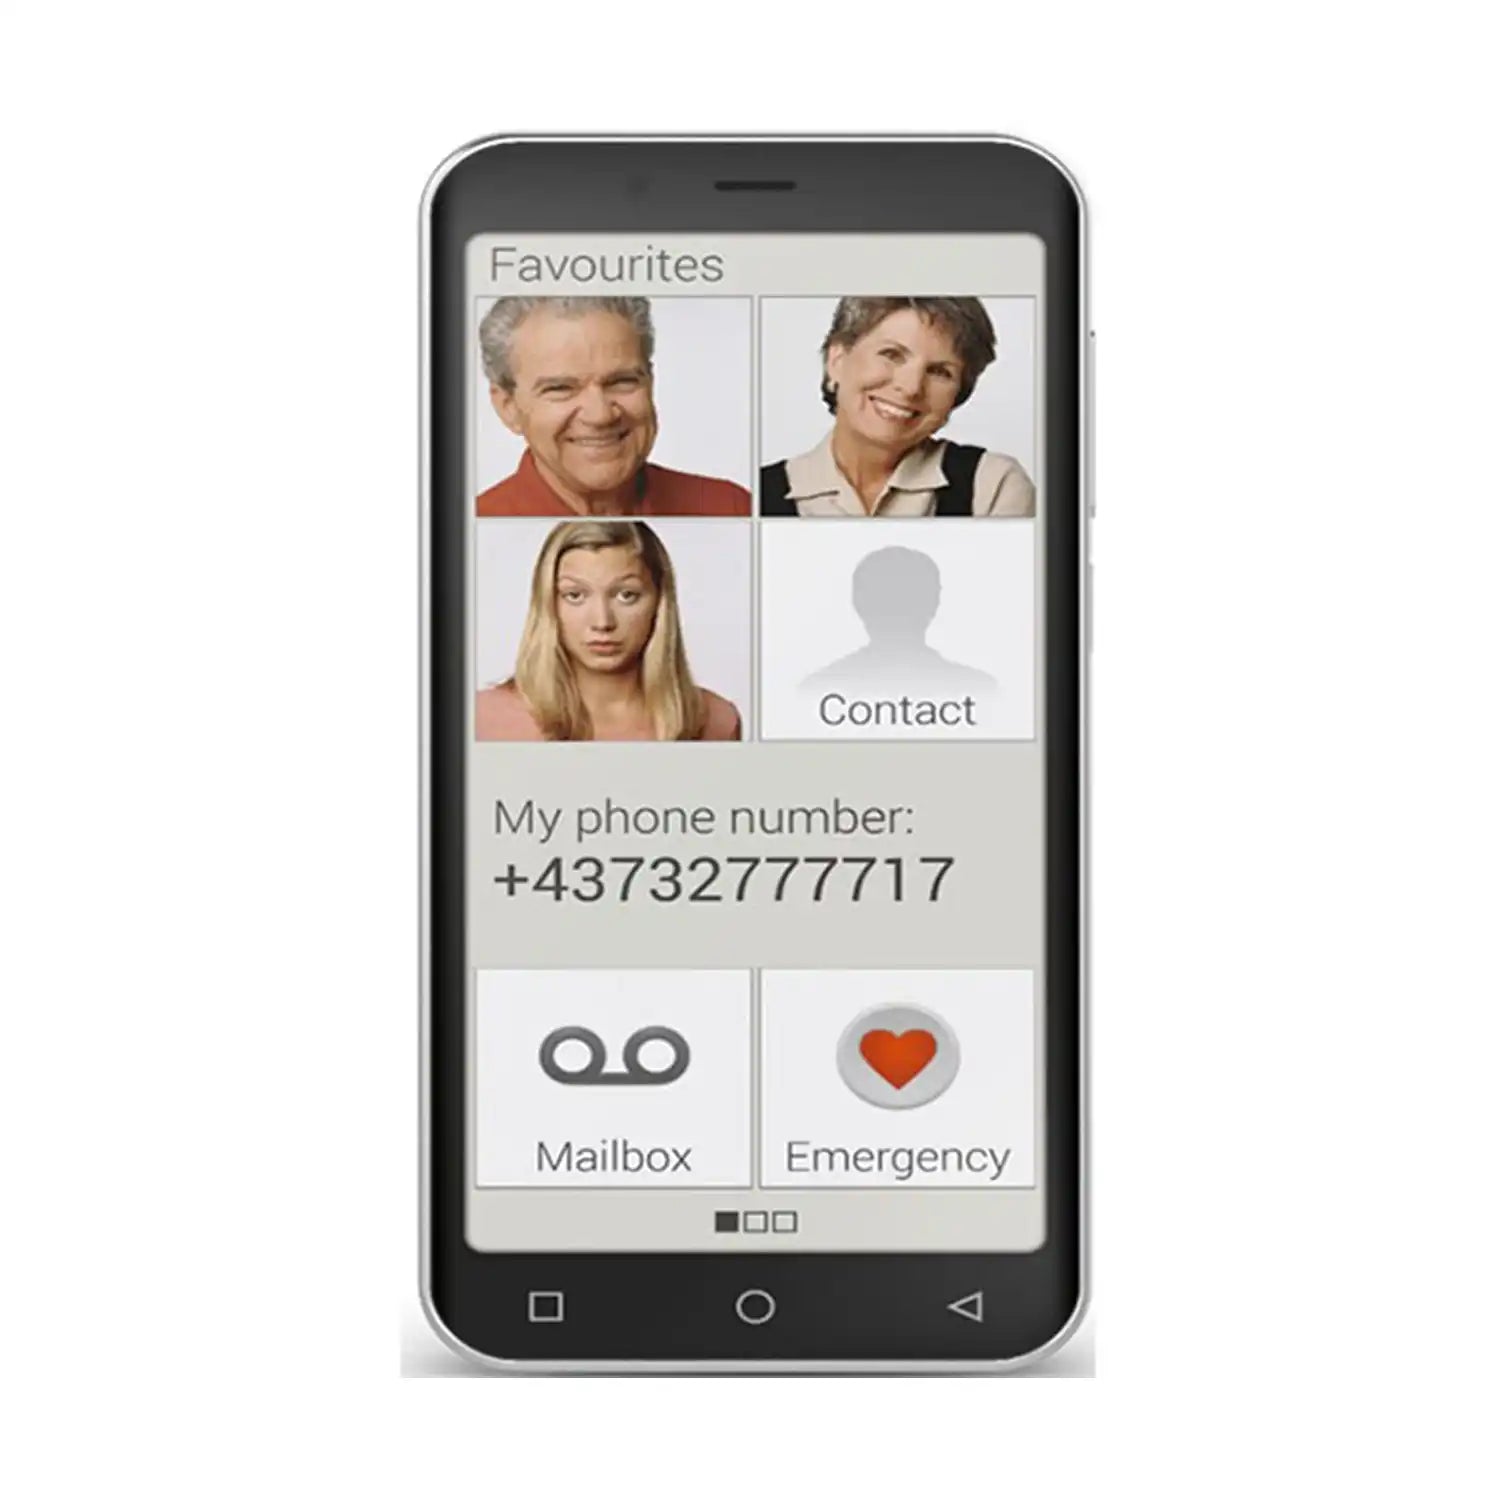 Emporia S4_001_UK SMART.4 –Easy-to-use Smartphone 1 Shaws Department Stores